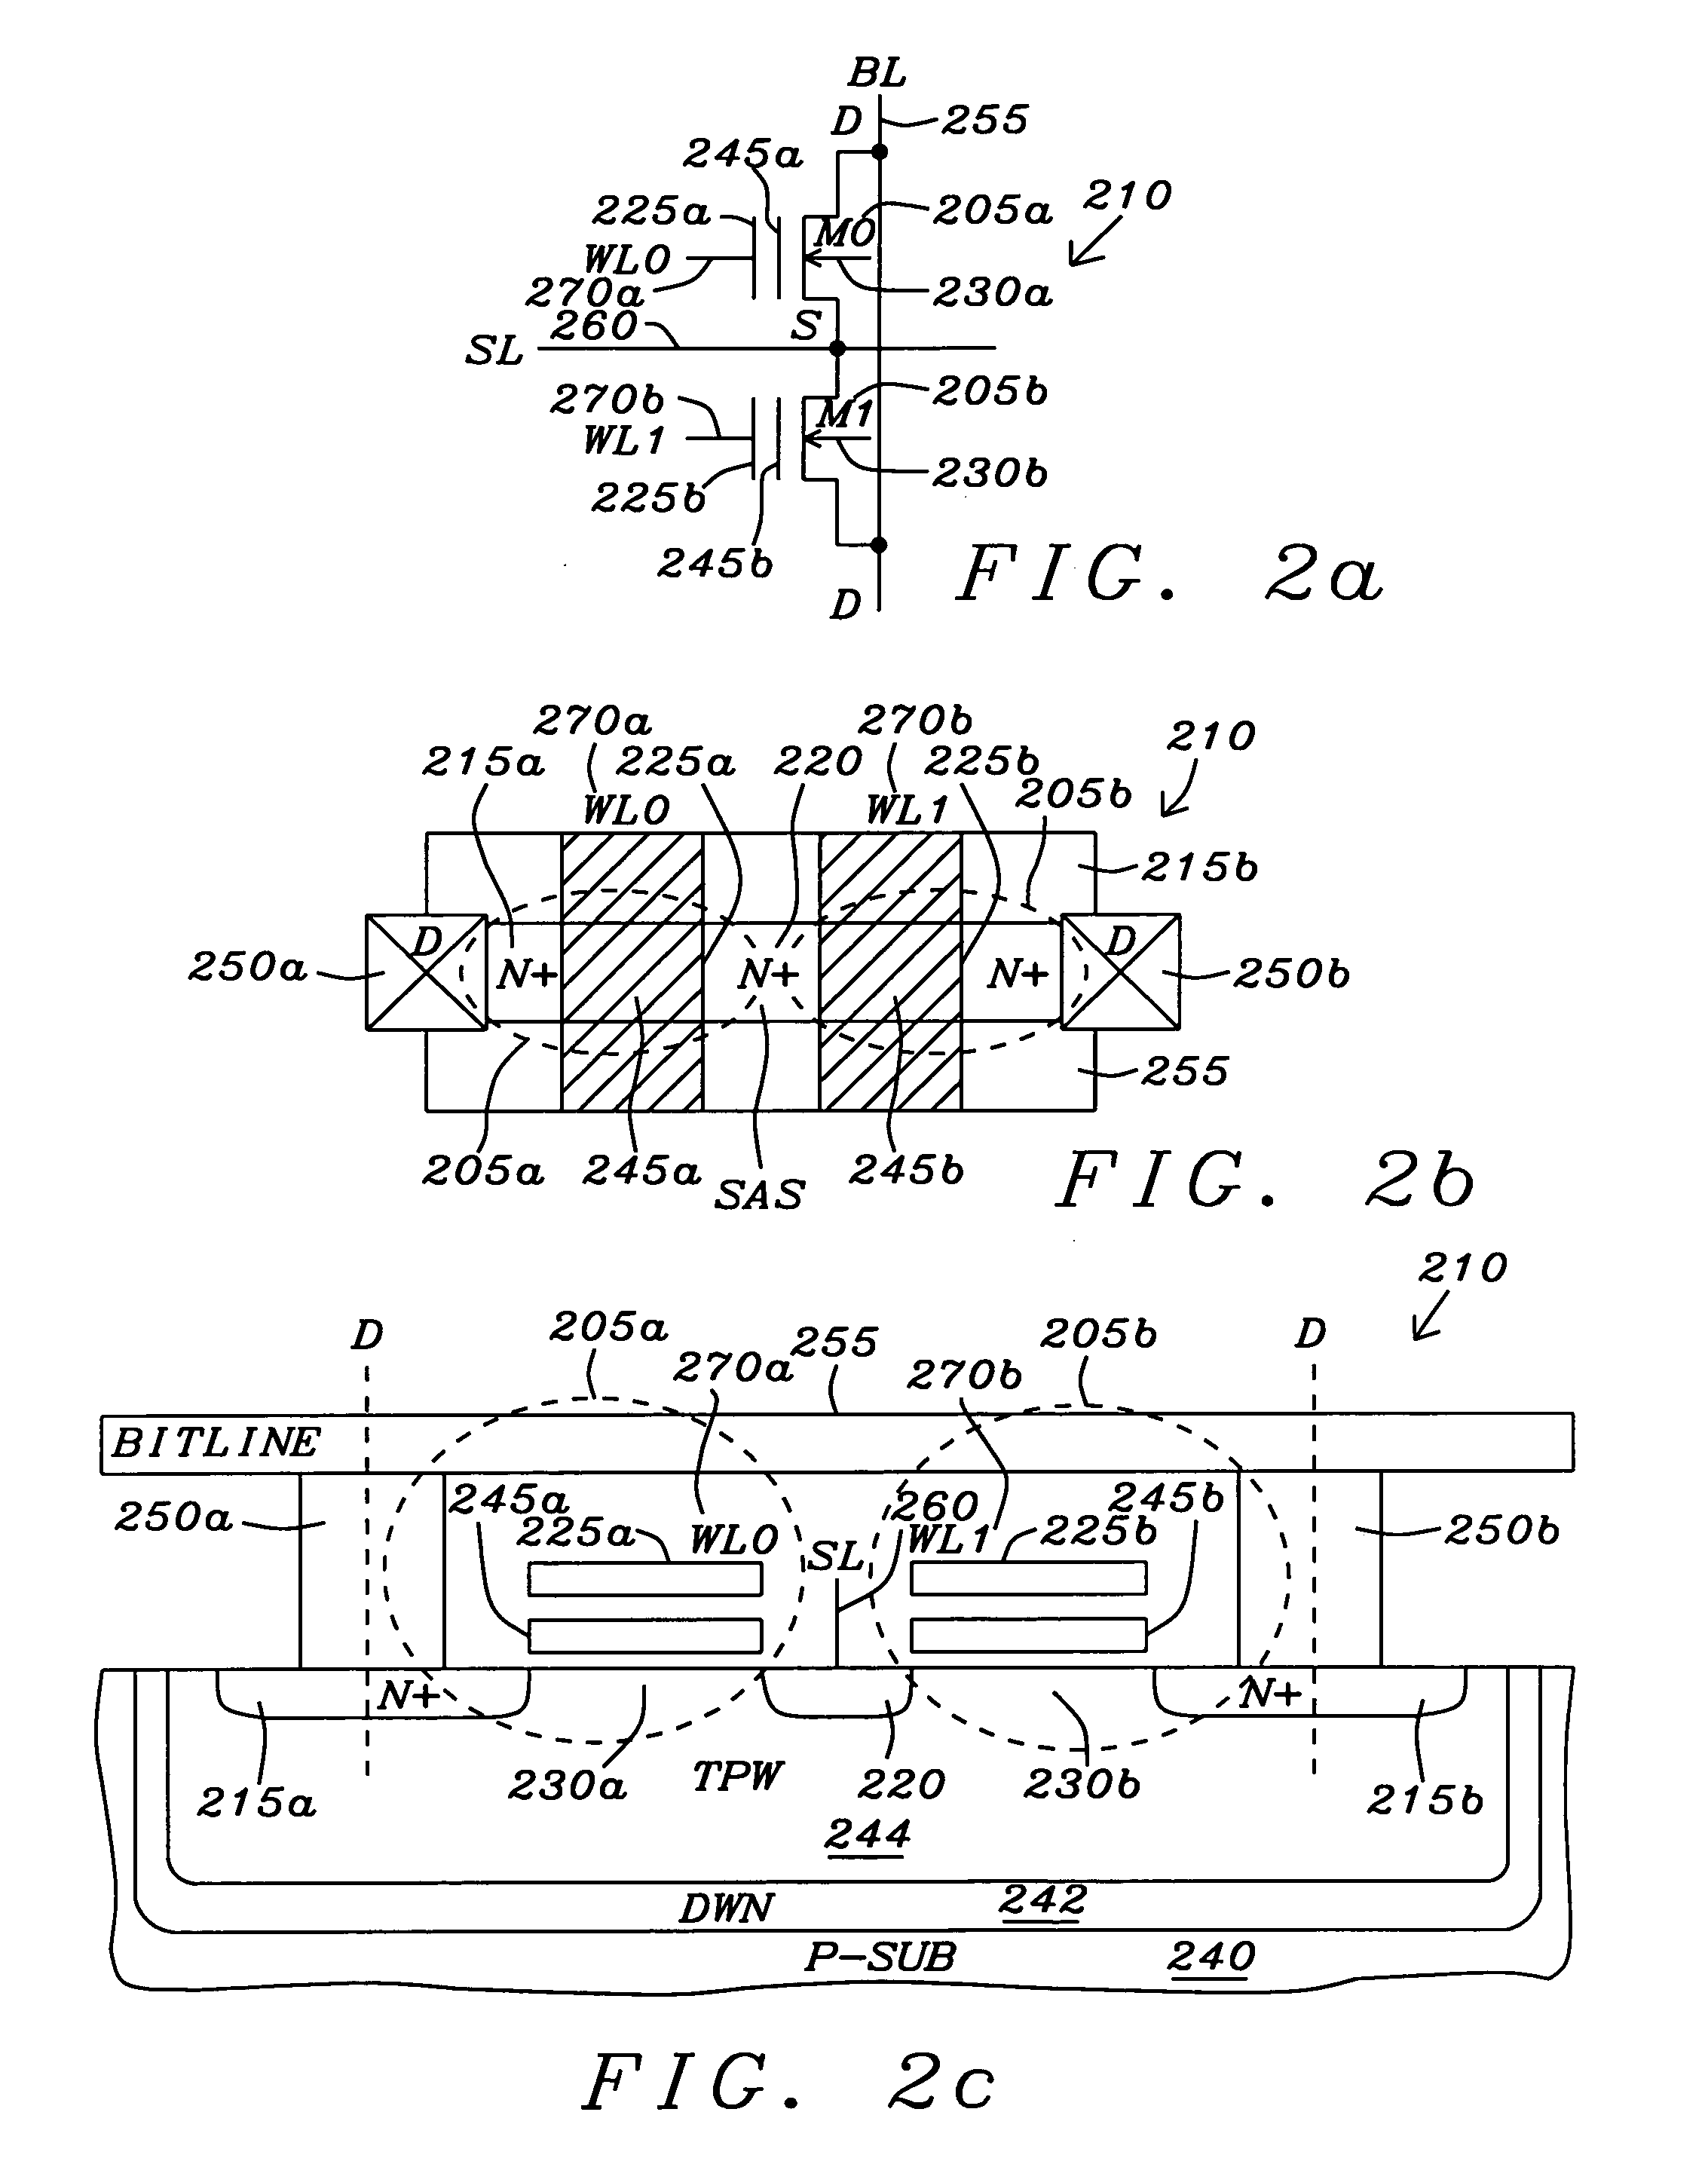 Apparatus and method for inhibiting excess leakage current in unselected nonvolatile memory cells in an array